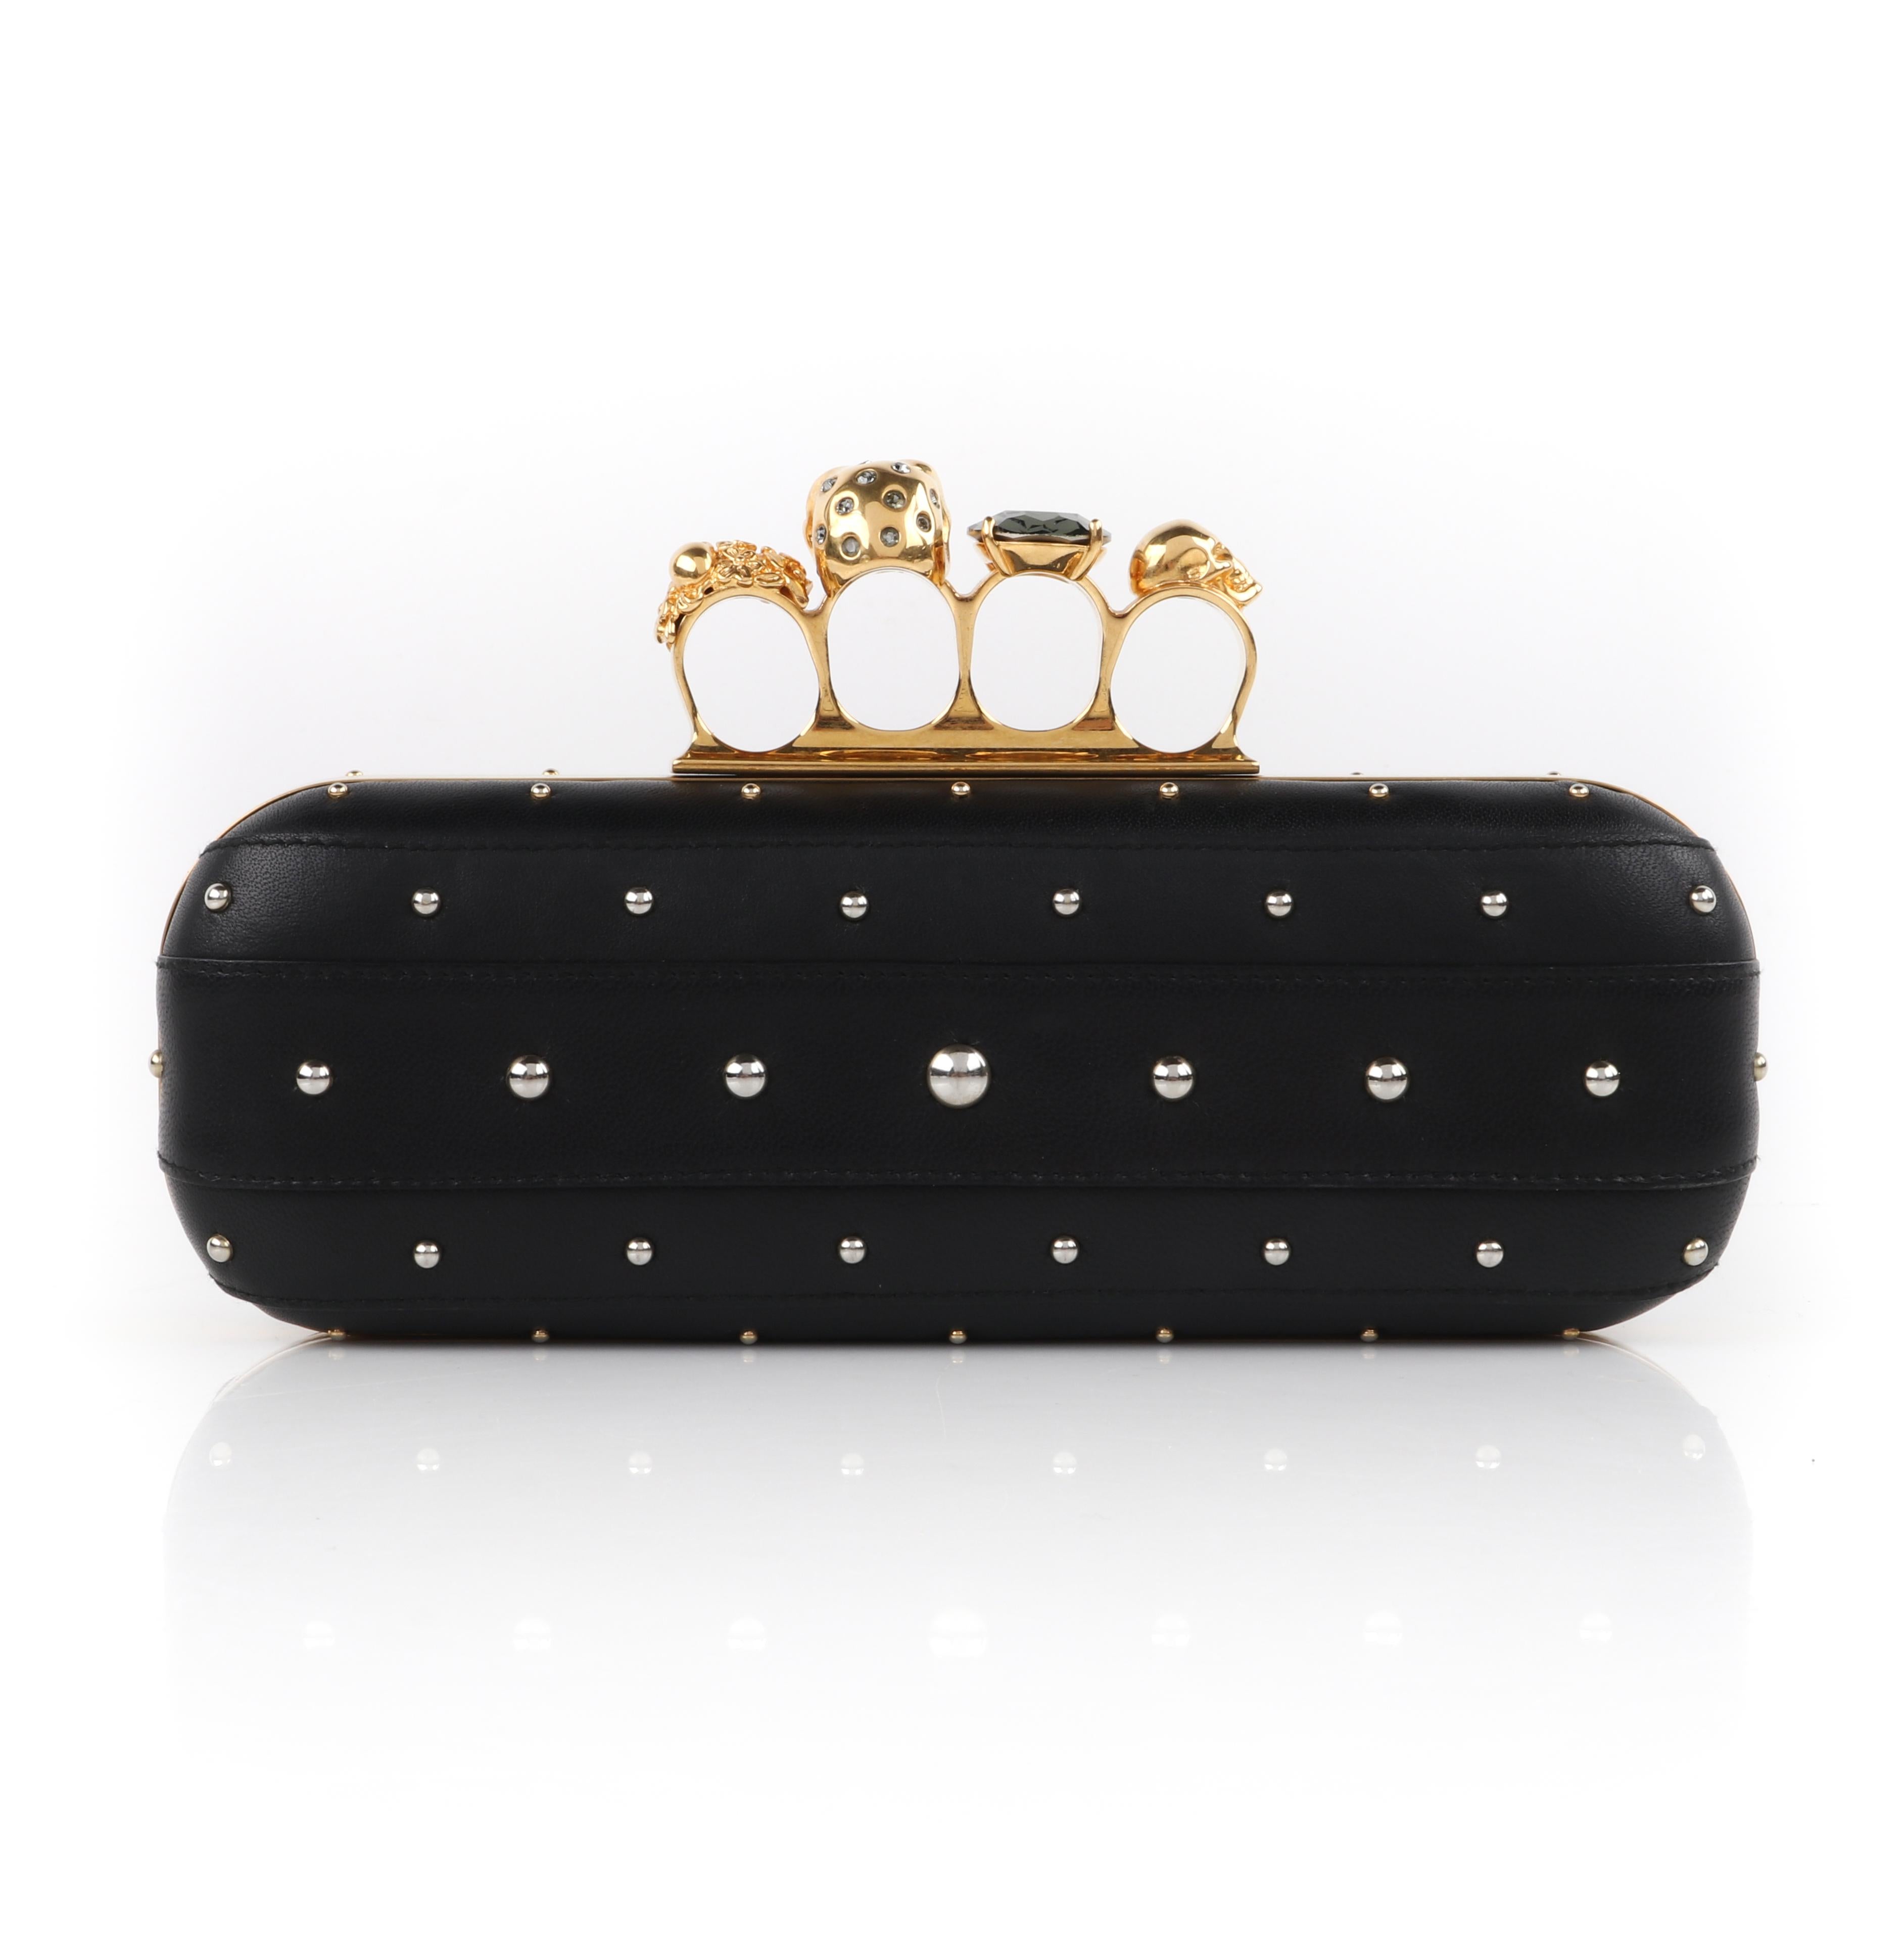 Women's ALEXANDER McQUEEN F/W 2013 Black Gold Leather Studded Knuckle Ring Duster Clutch